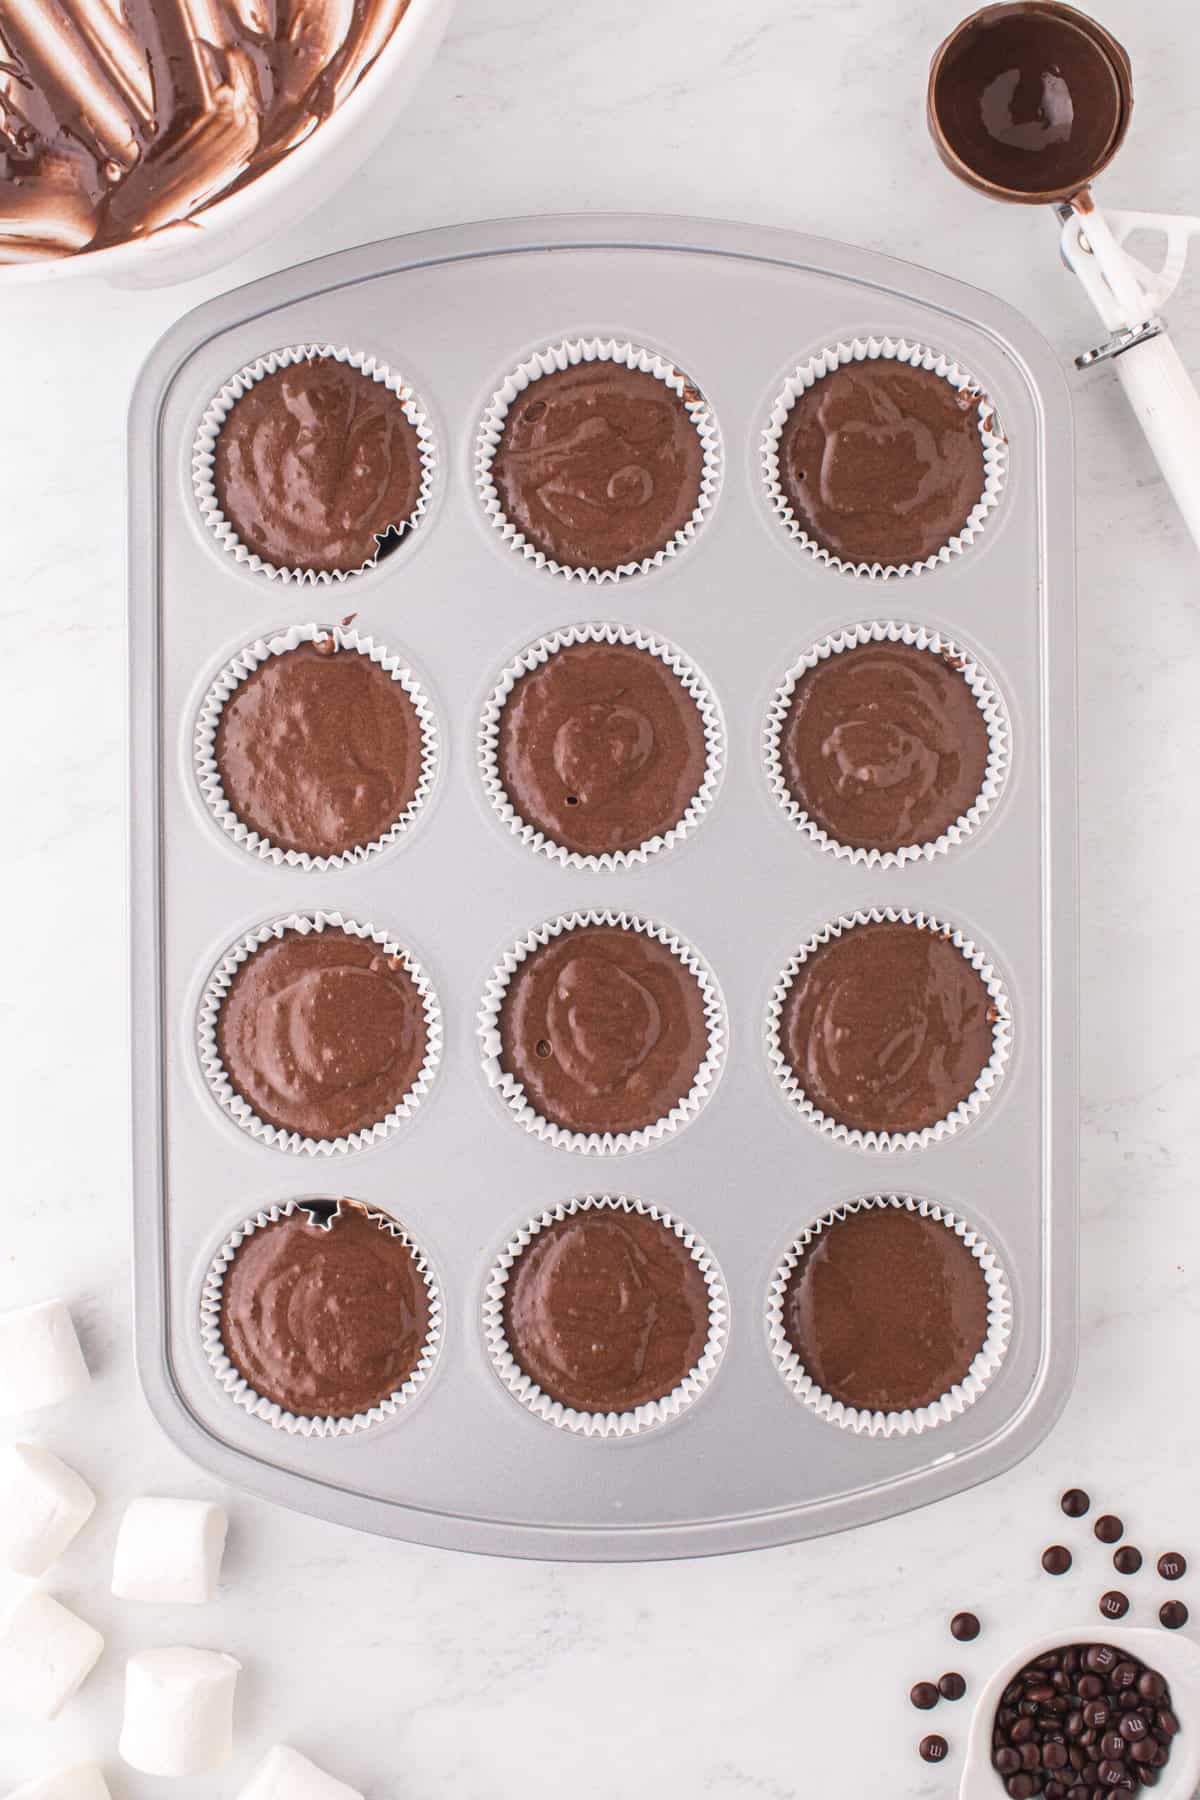 Pour batter into cupcake tin keeping them about 2/3 full.